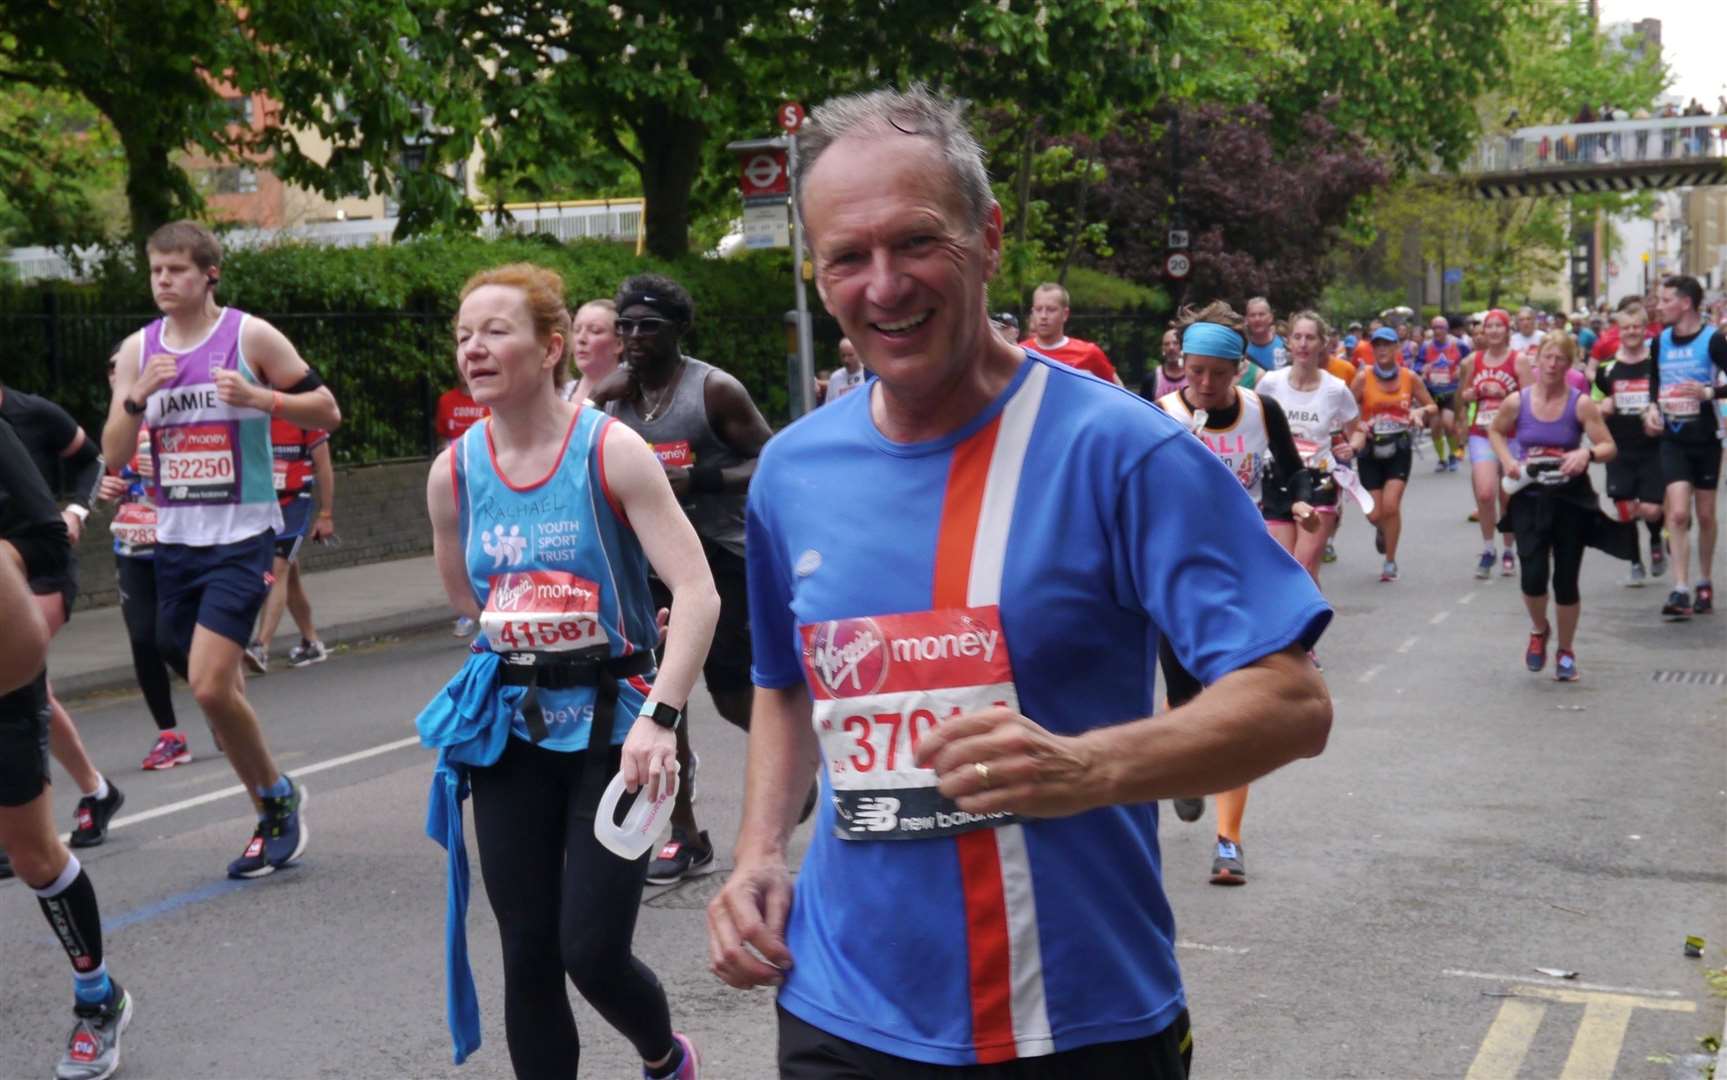 Ray Johnson completed his 19th London Marathon in a row in 2019